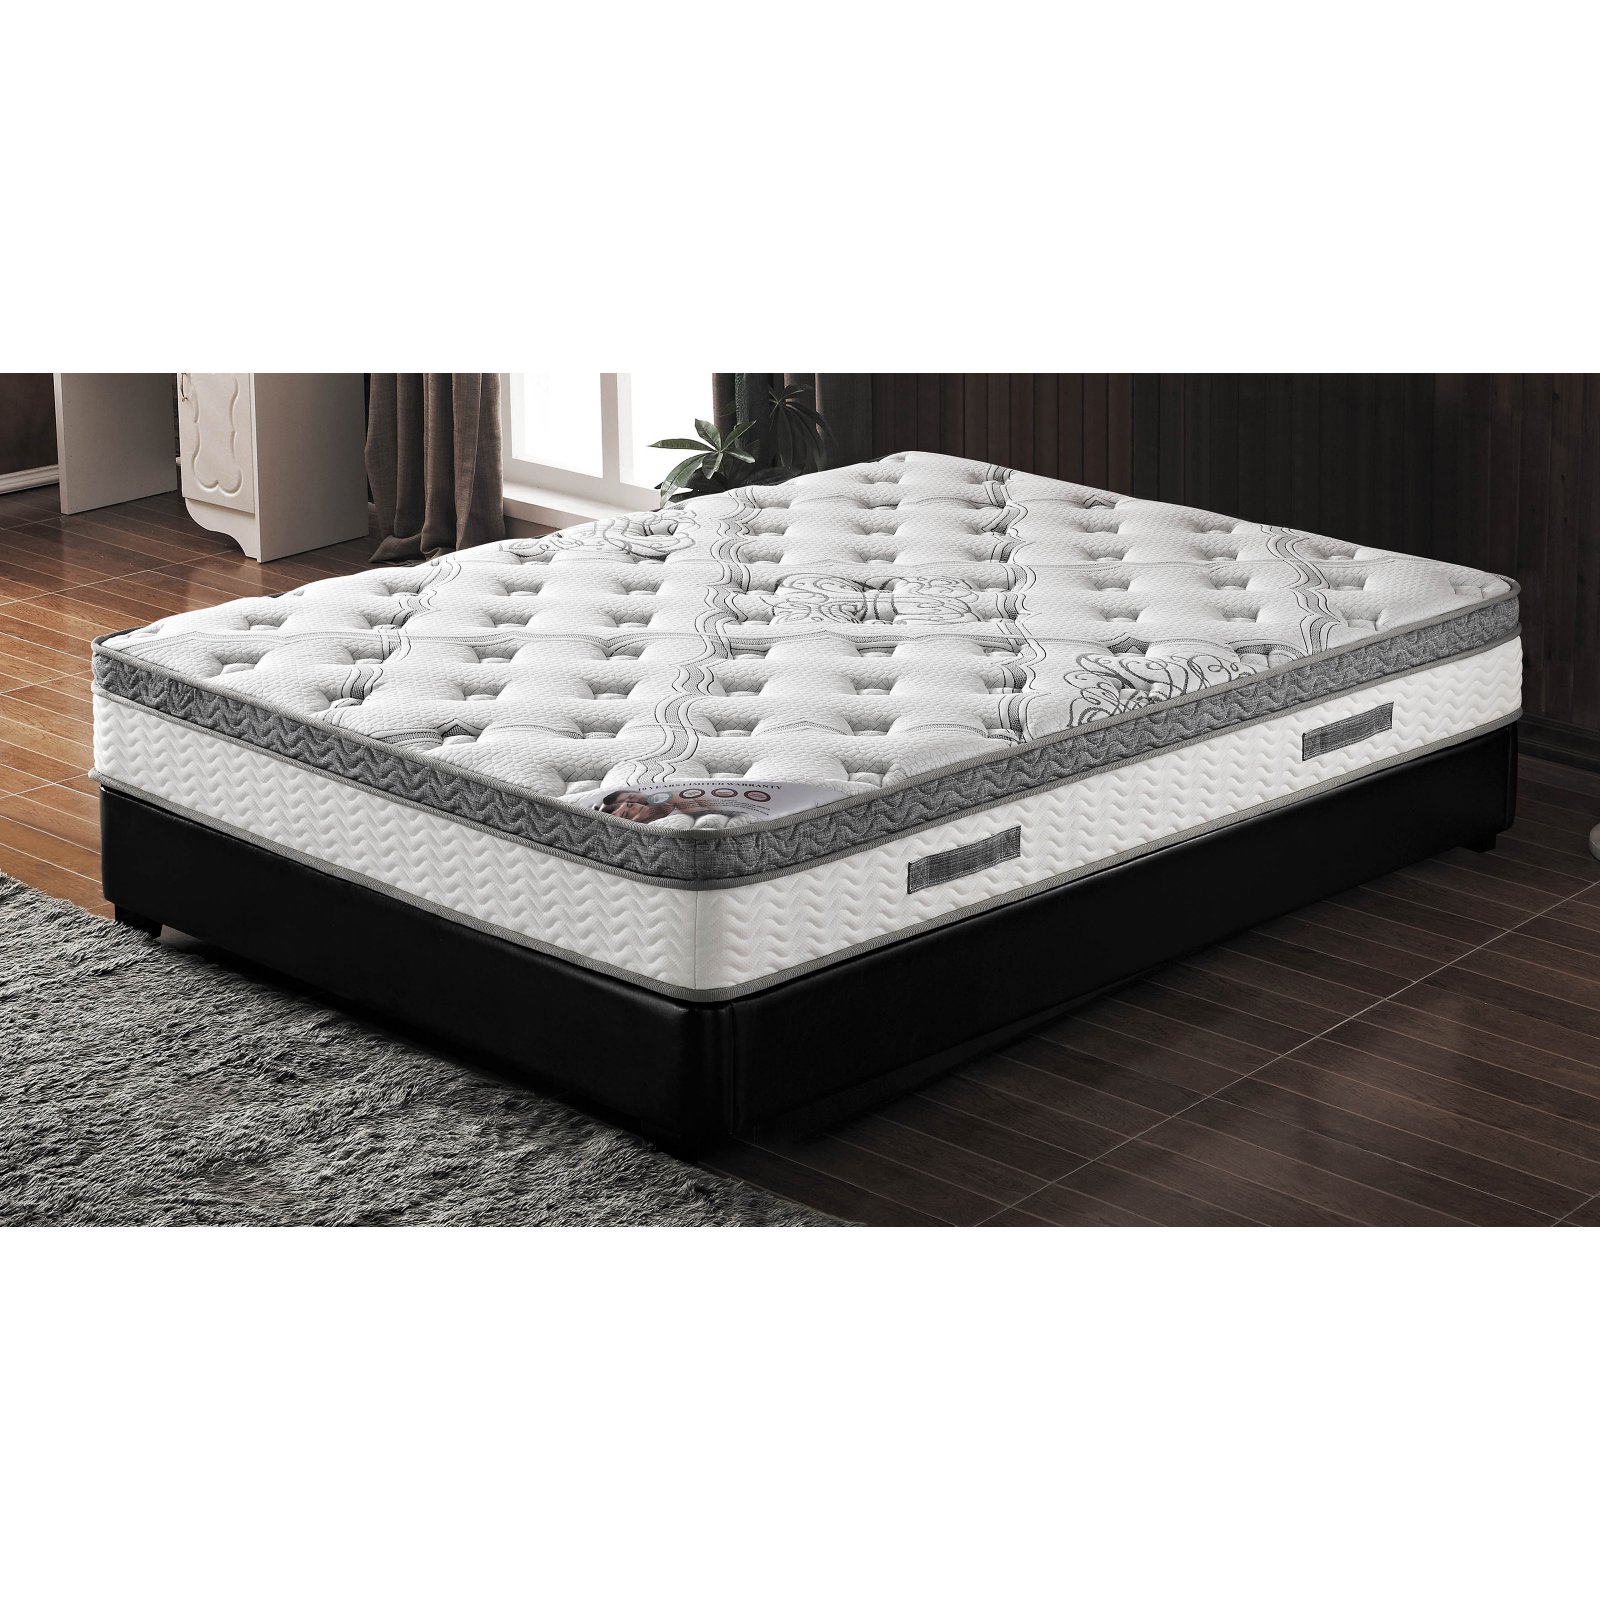 Milton Green 10 in. Pocketed Coil Mattress with Pillow Top ...